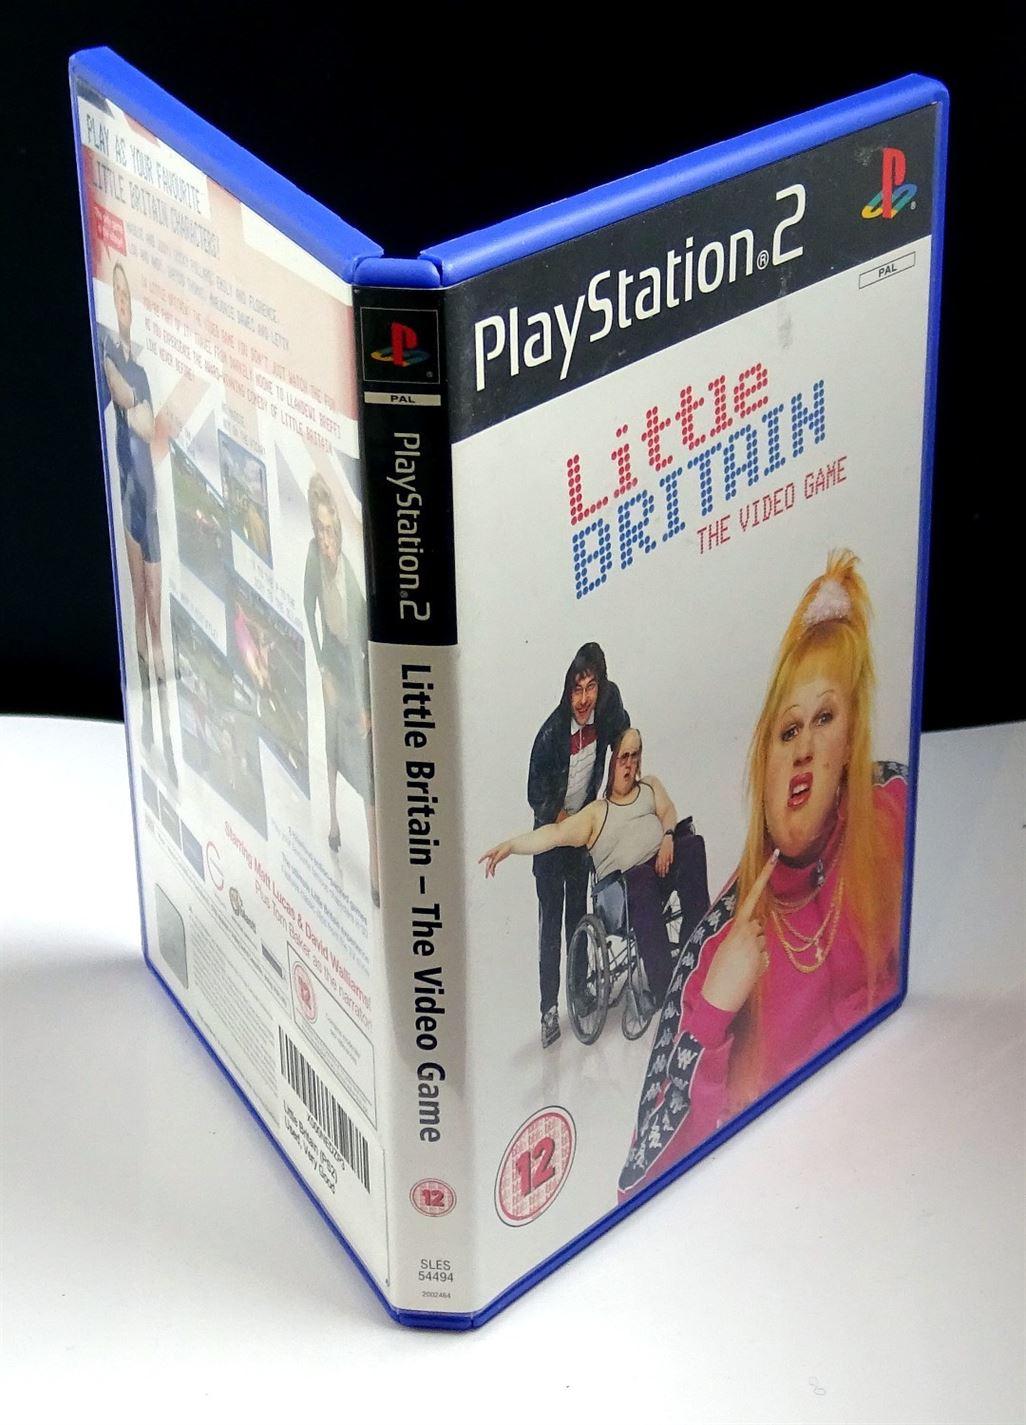 Little Britain: The Video Game PS2 (Playstation 2) - UK Seller